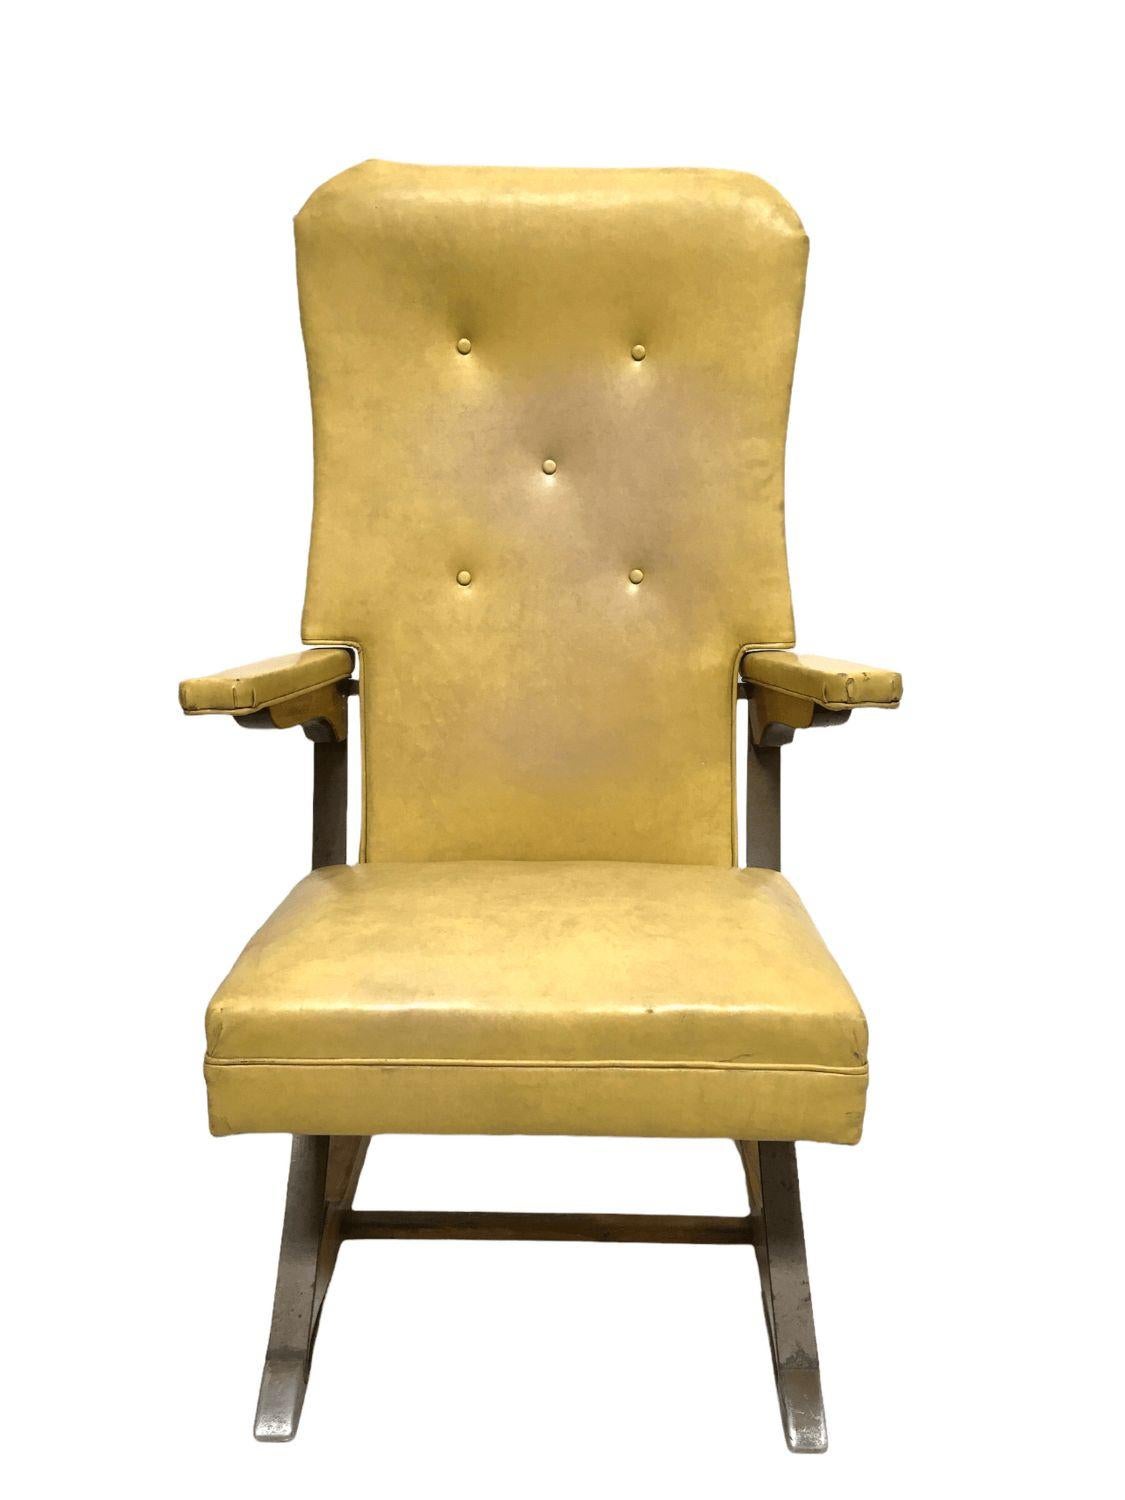 Vintage rock-a-chair cantilever rocker chair in Harvest Gold Vinyl. $1,450
 
This Mid-Century Style Cantilever Rocker Chair features a harvest gold vinyl. Originally manufactured by Aldeuman Acres Manufacturing, its frame combines wood and metal